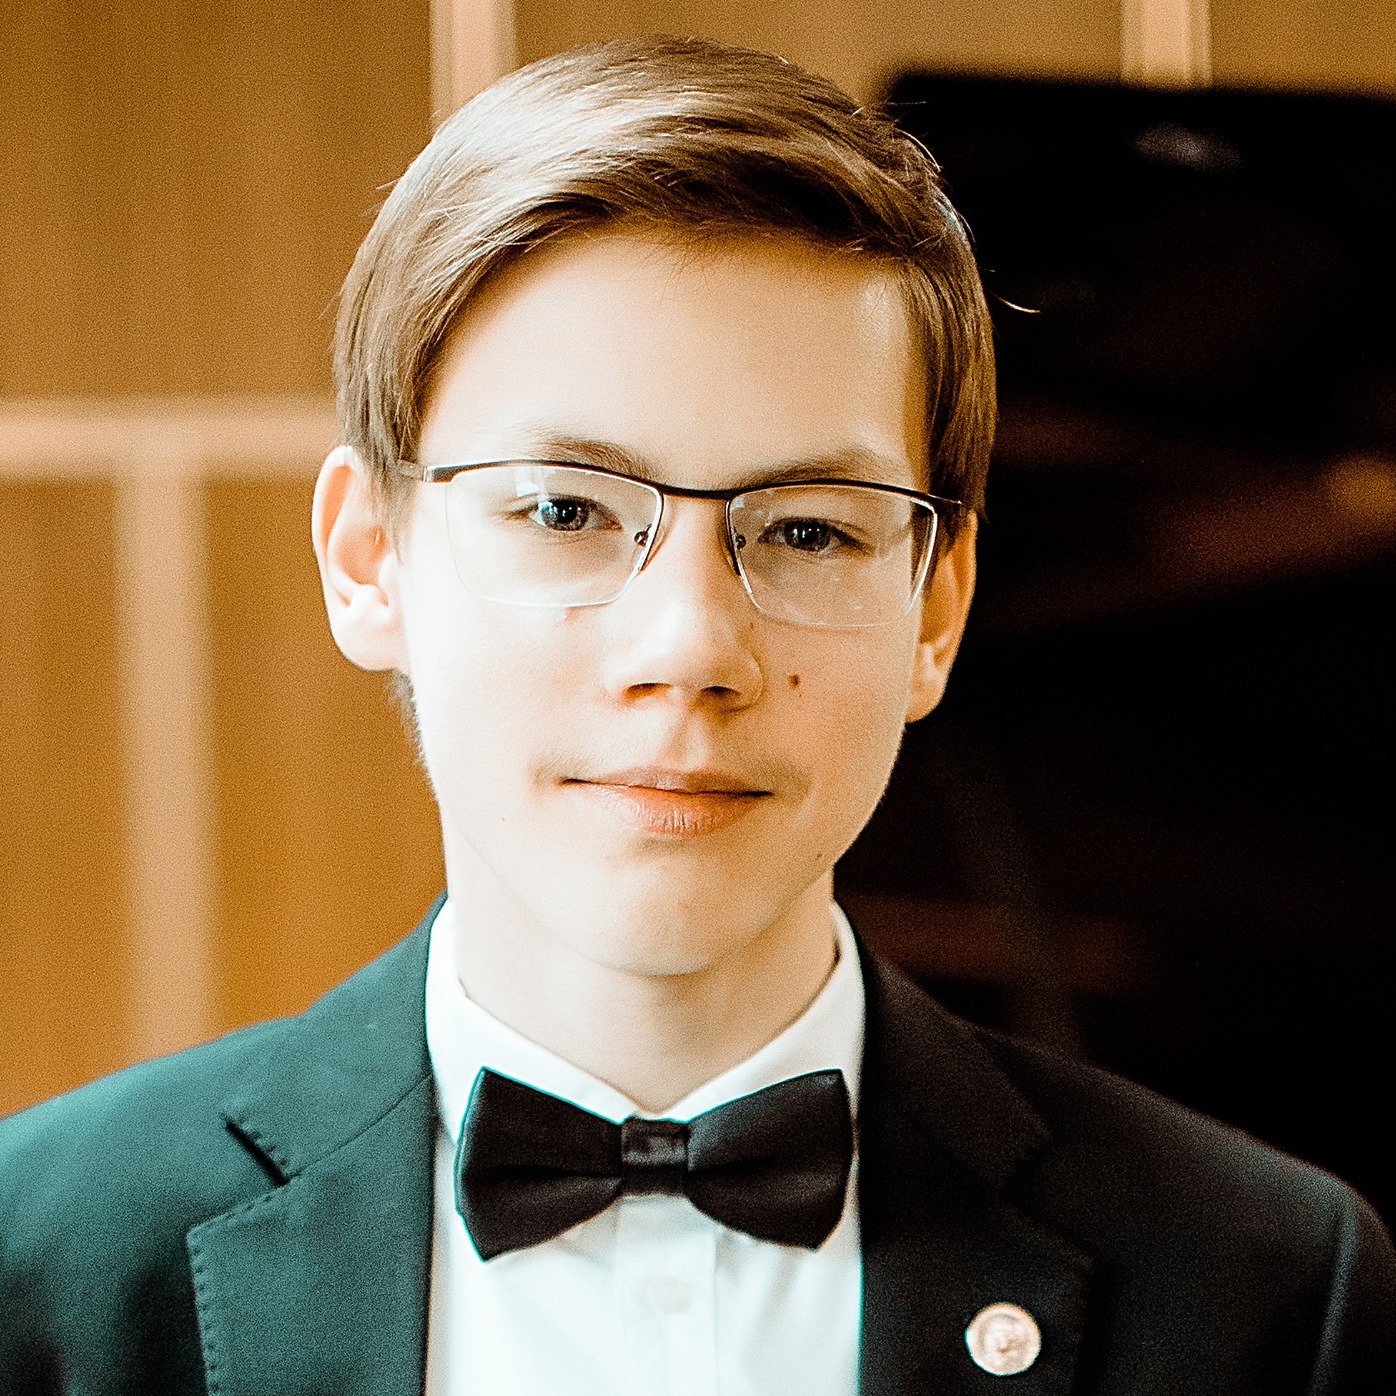 Ukrainian wins displaced piano competition